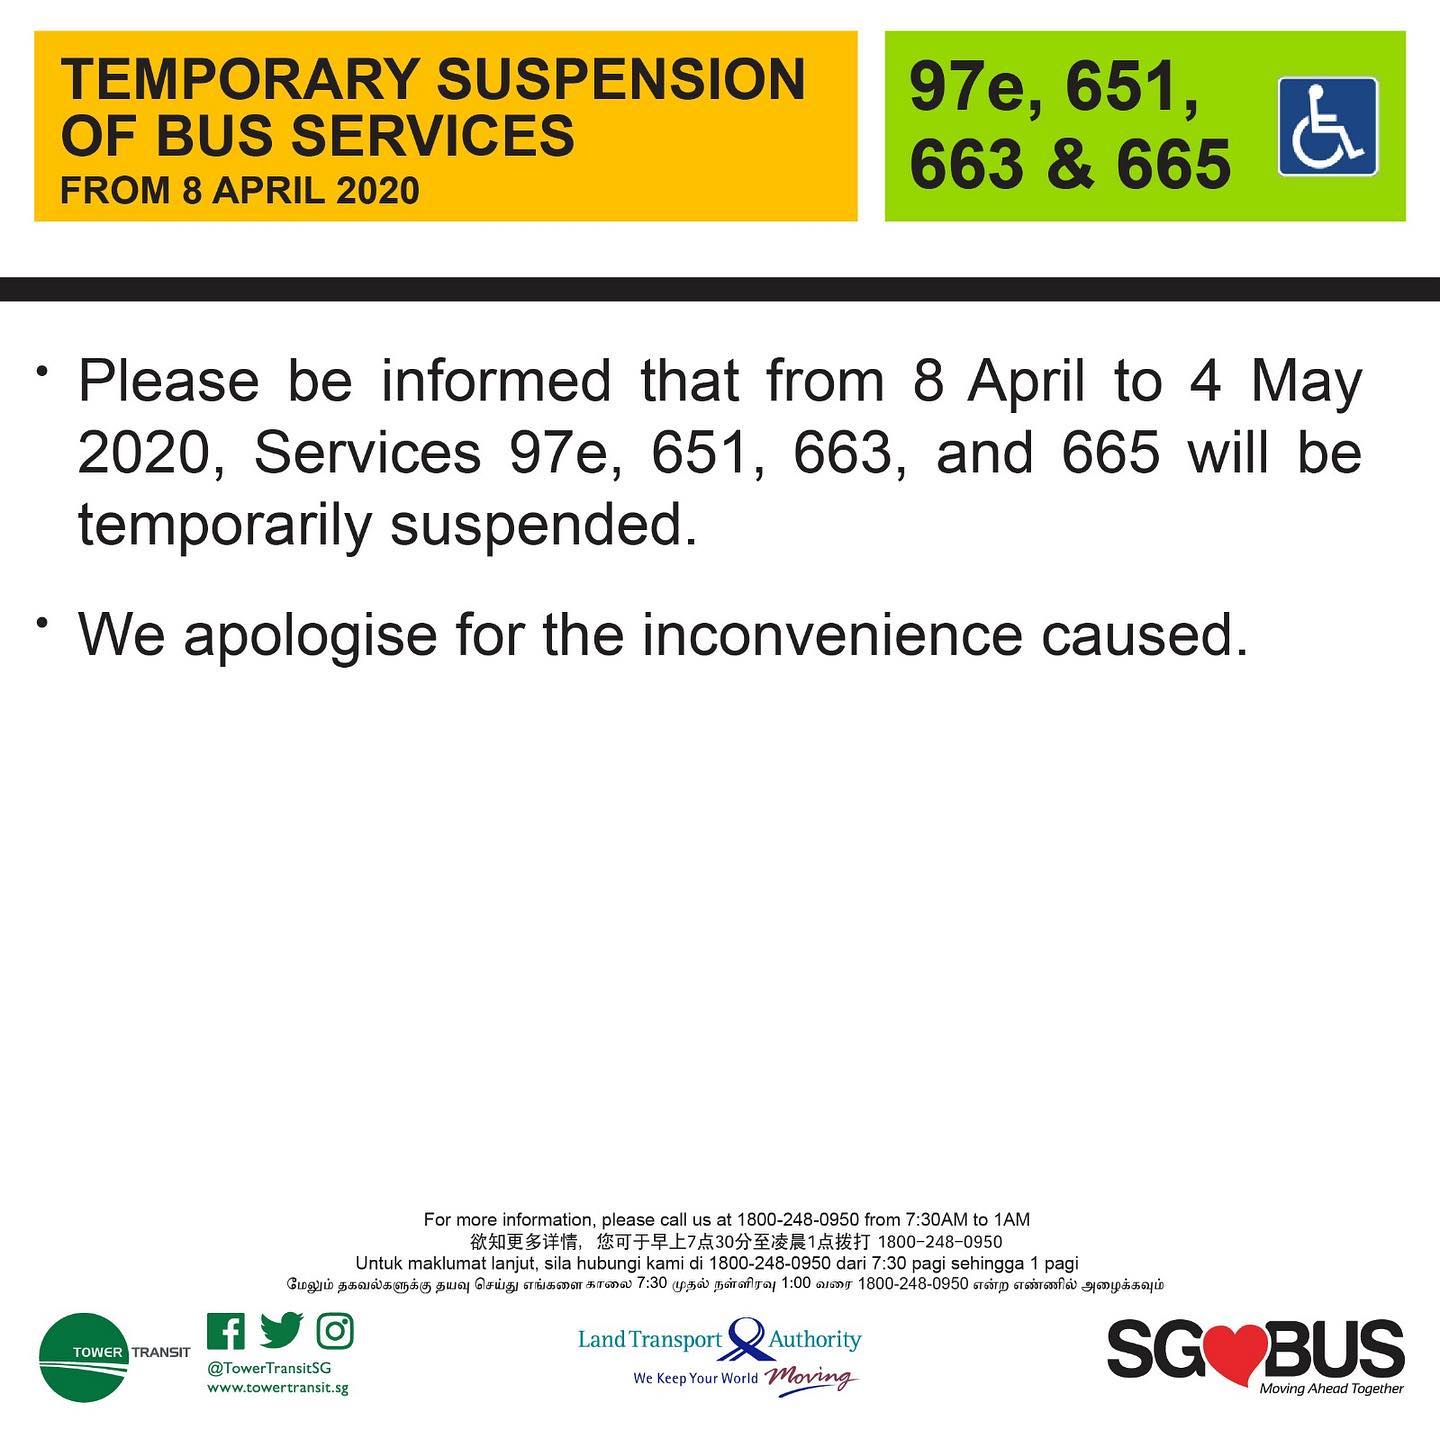 Official announcement from Tower Transit Singapore on temporary bus service suspension during COVID-19 Circuit Breaker measures from 8 April 2020.